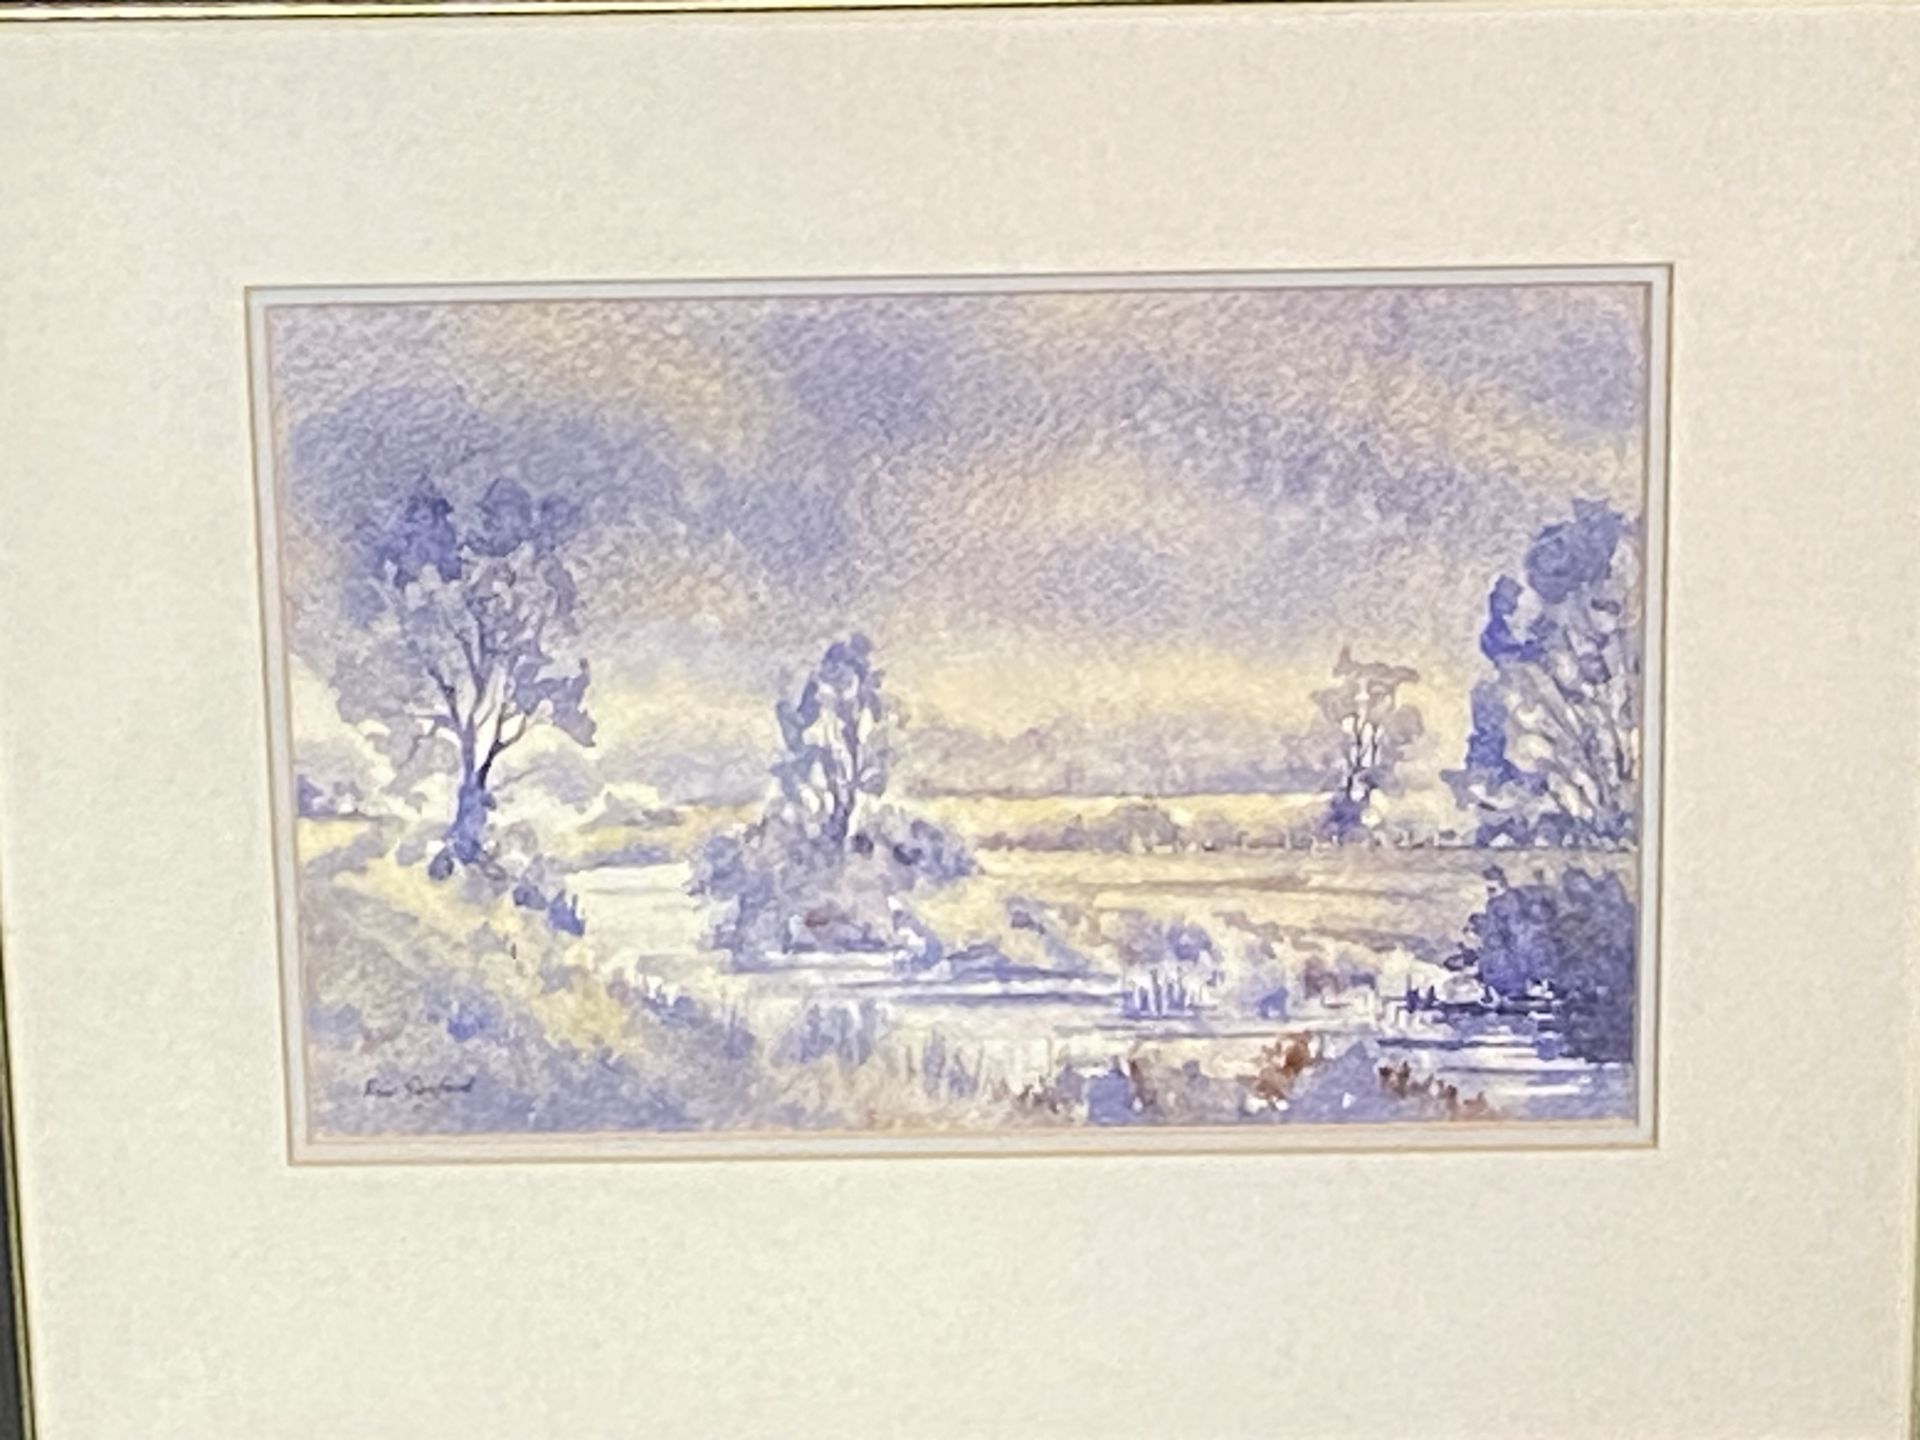 Framed and glazed watercolour by Ron Cosford - Bild 3 aus 3